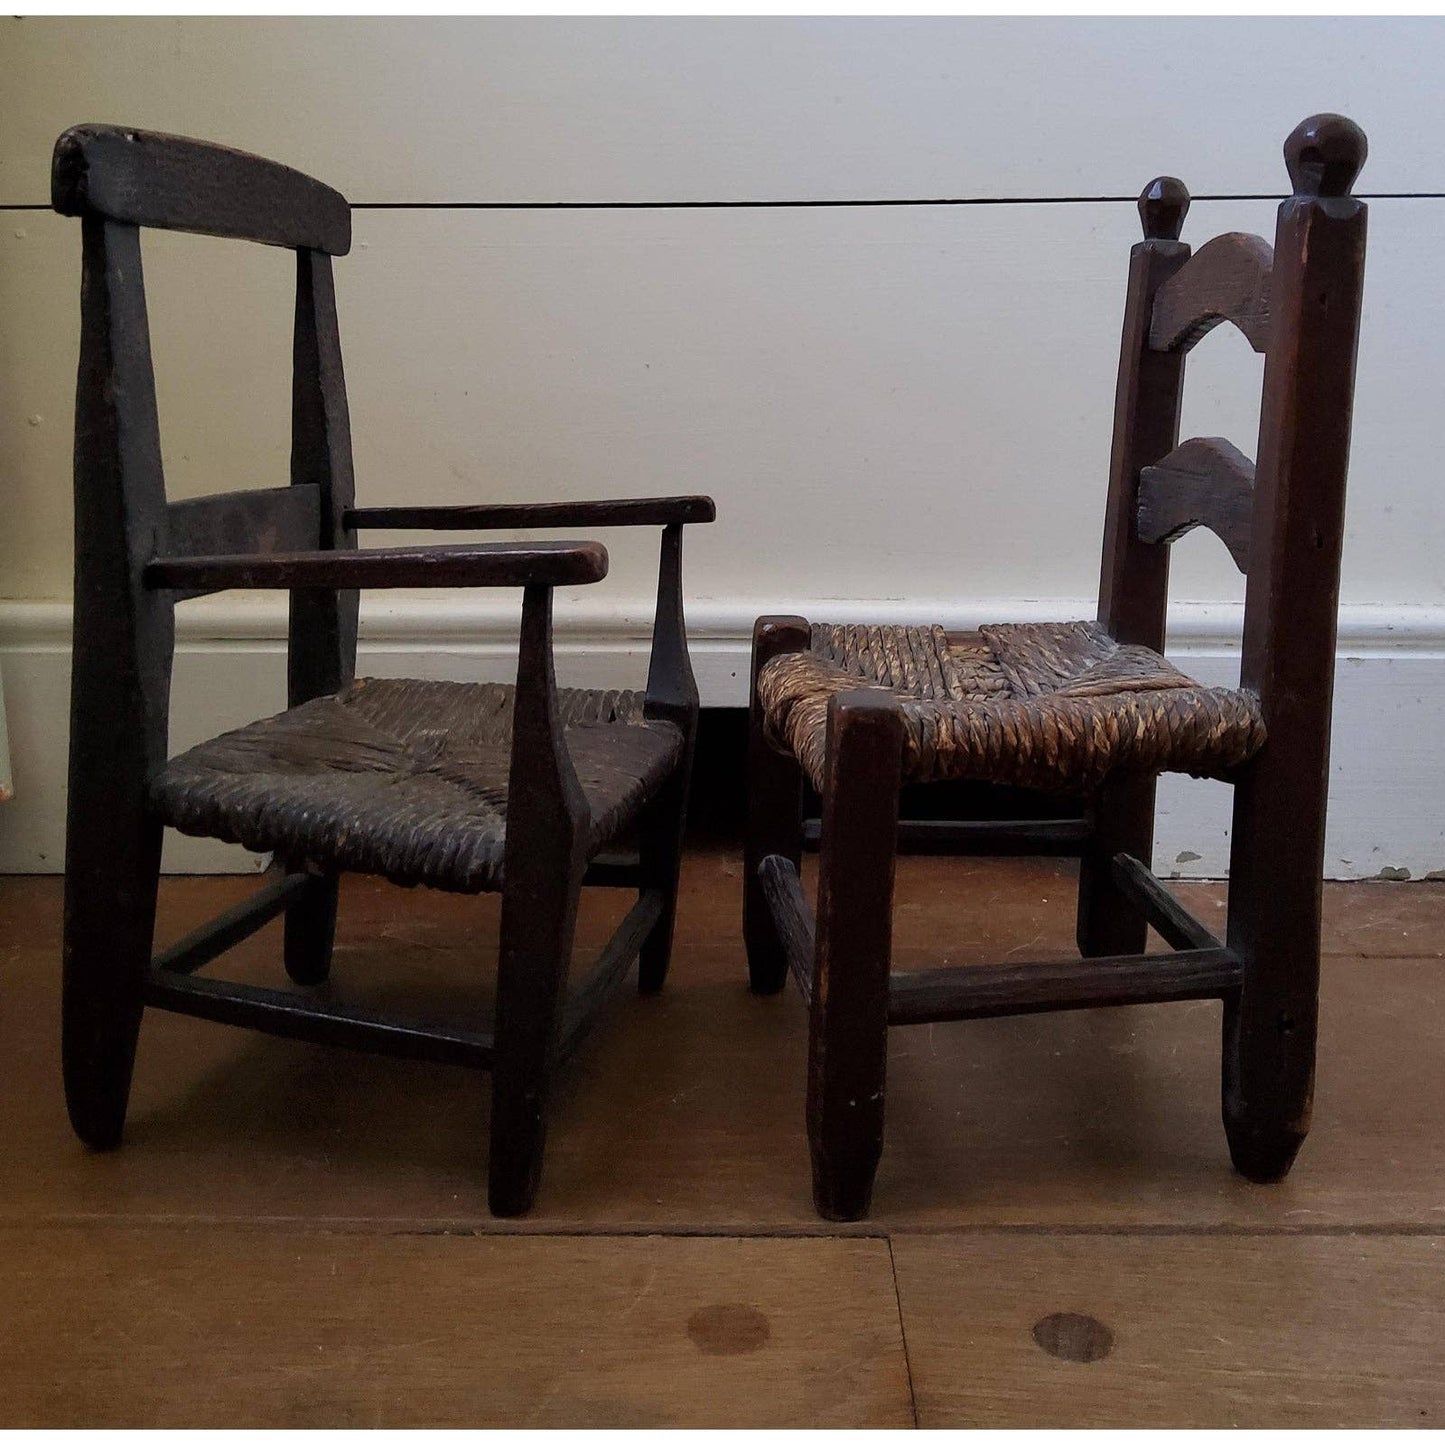 Pair of Rustic American Miniature Chairs Early 19th C